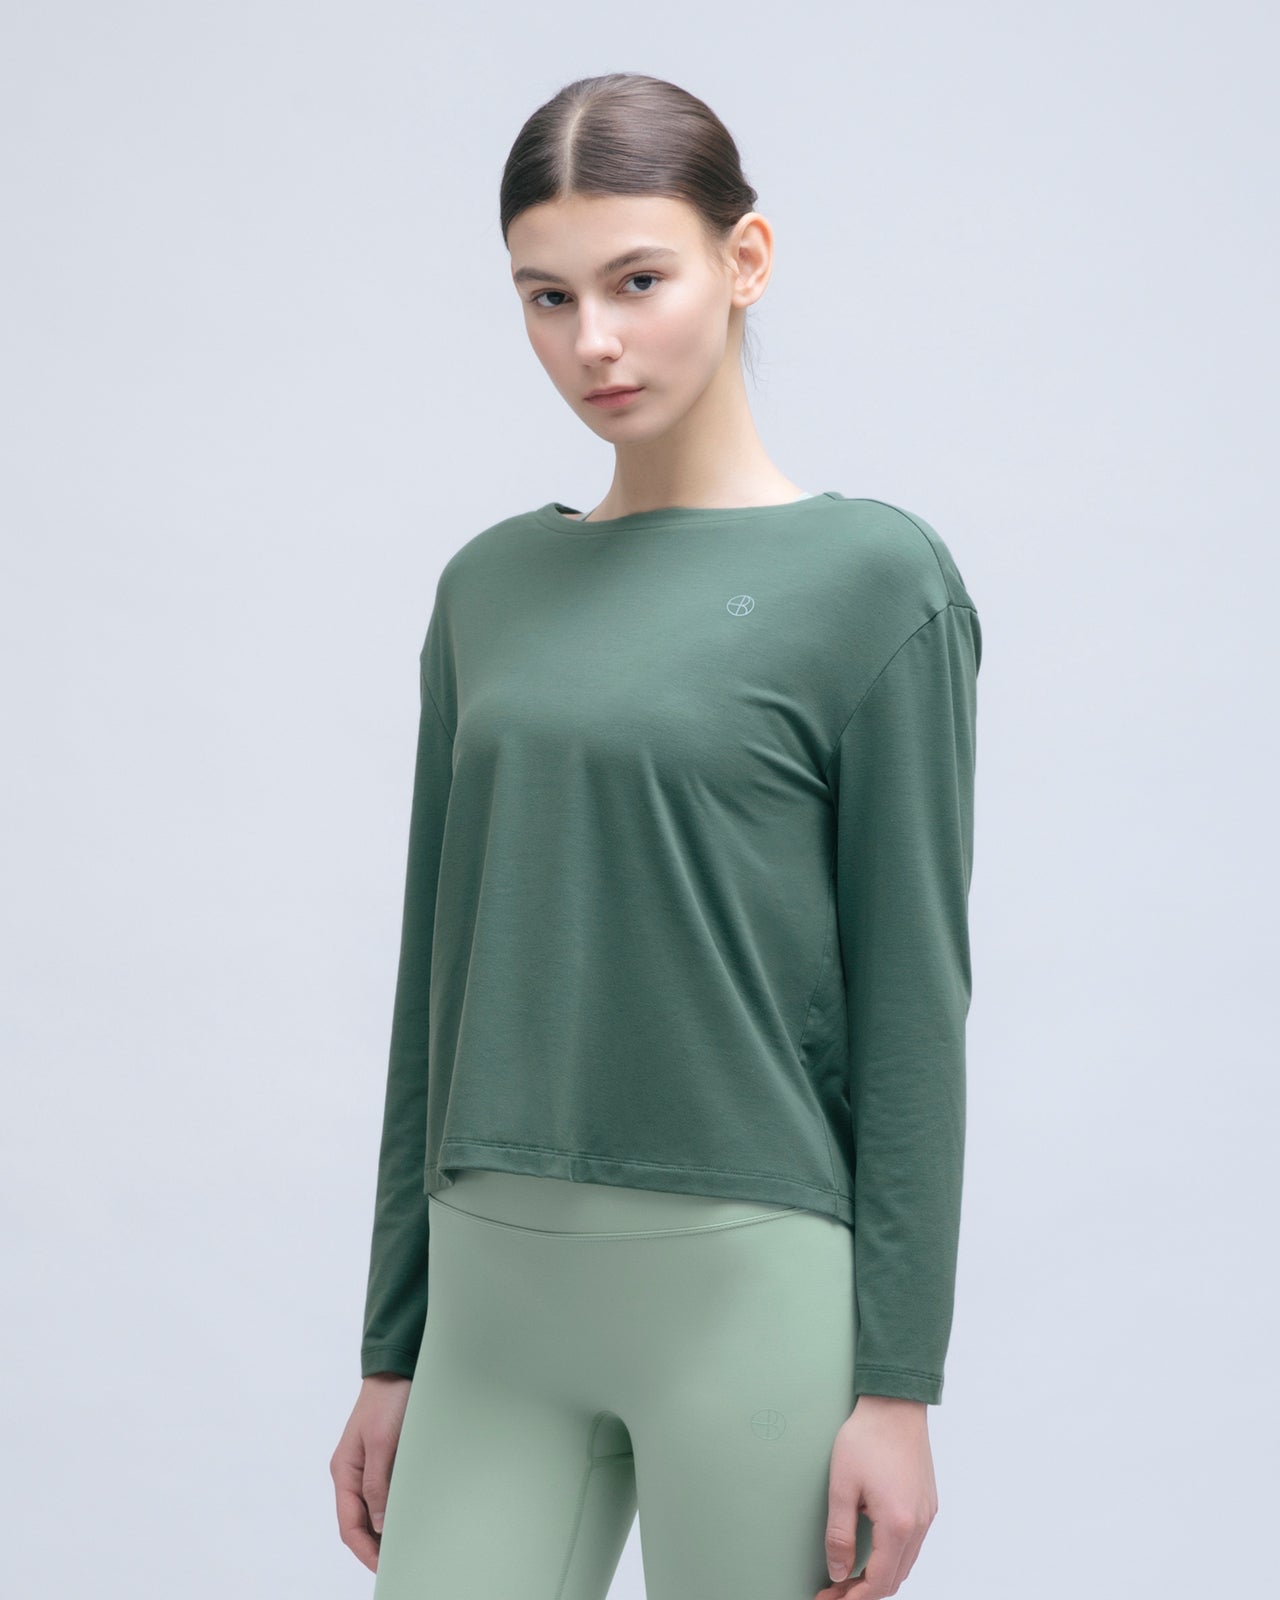 Barrel Fit Cover Up Long Sleeve-GREEN_image2